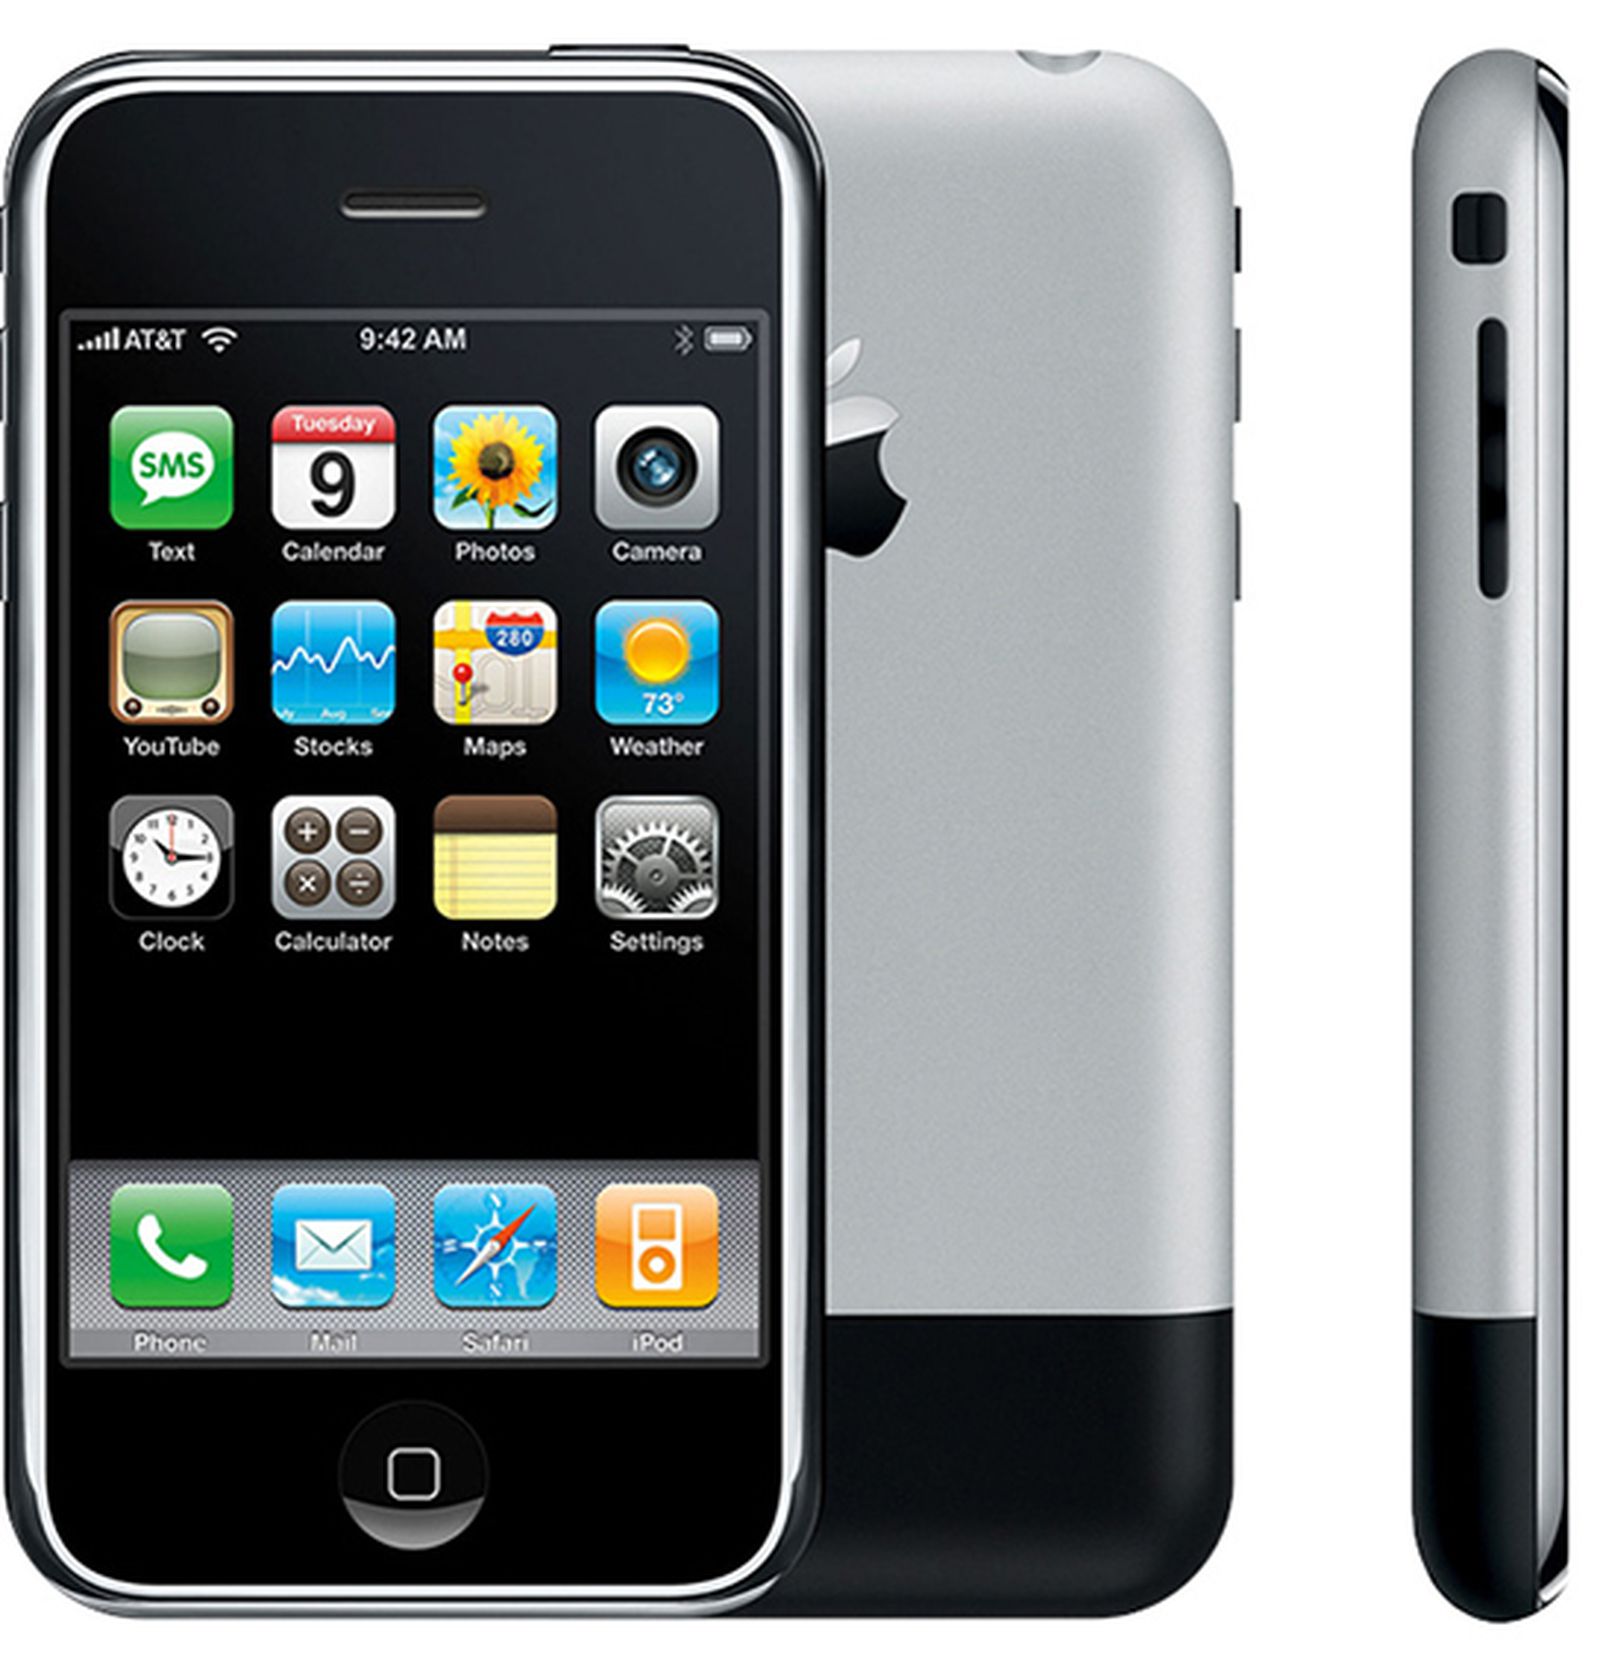 First generation iPhone auctioned for over $63K